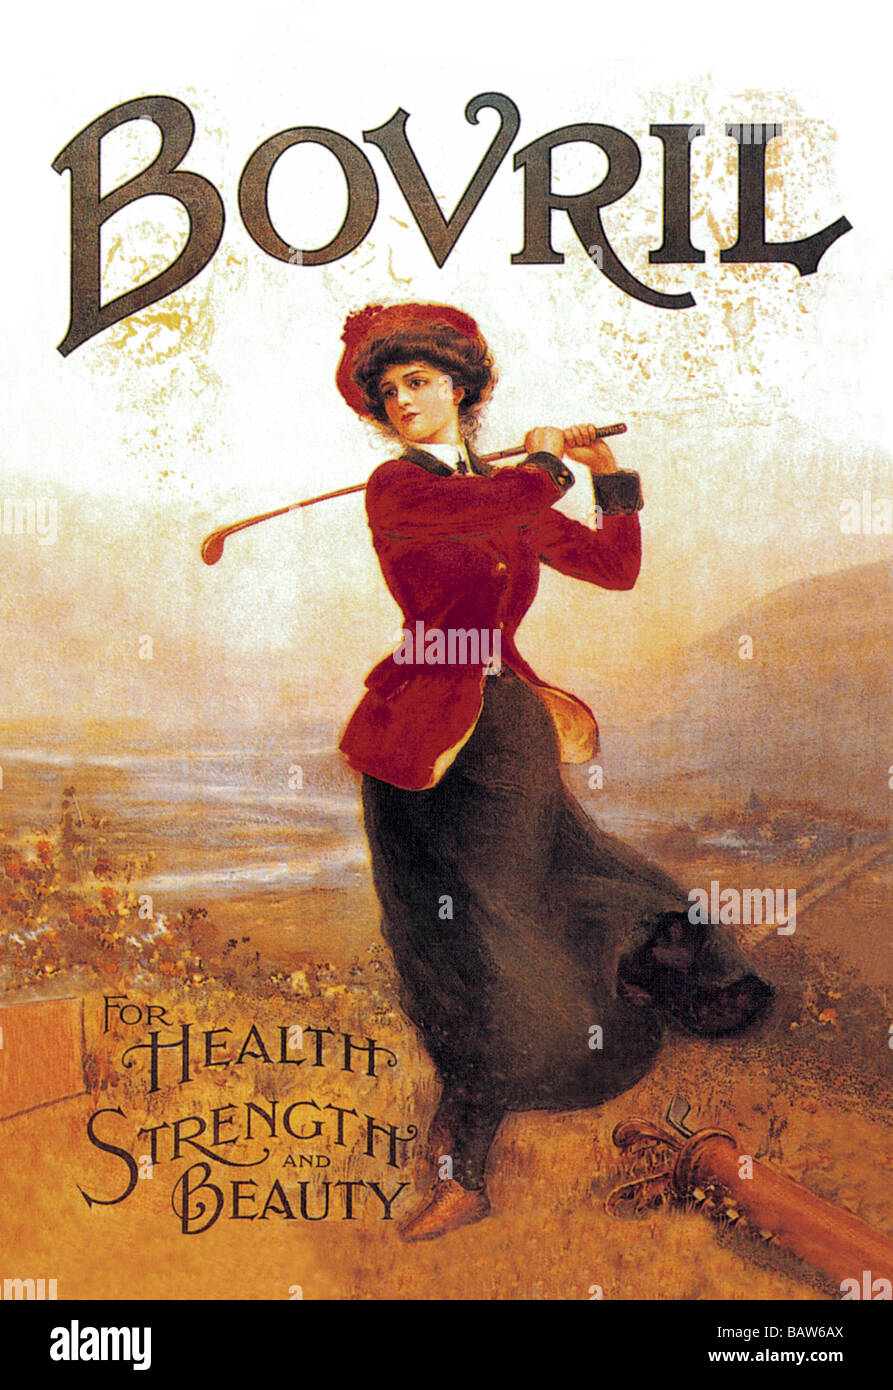 Bovril - For Health,Strength and Beauty Stock Photo